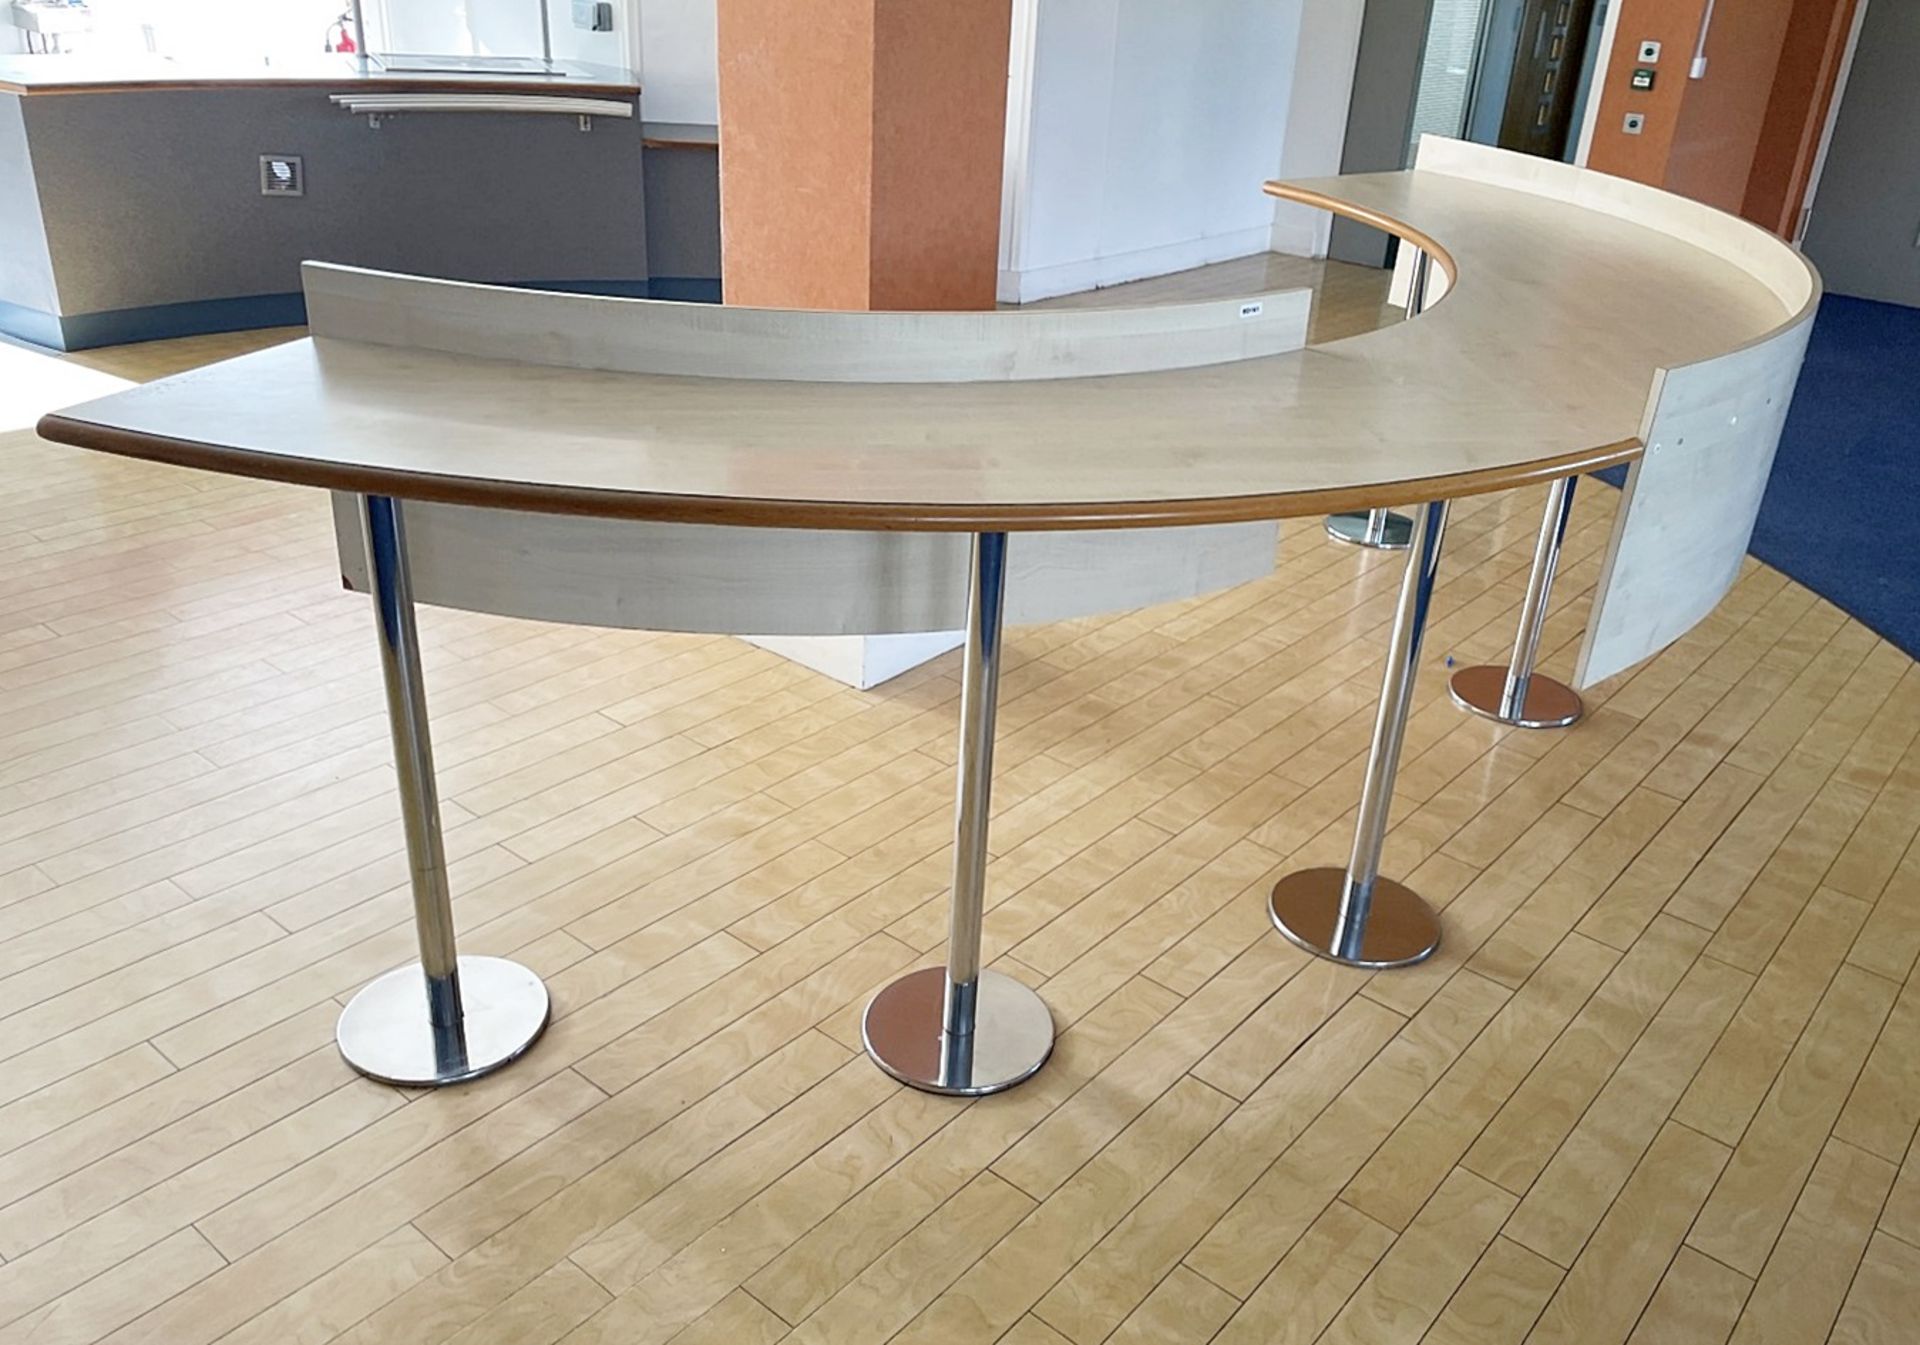 1 x Curved Workstation / Breakfast Bar - Dimensions: W390 x D50 x H99cm Ref: ED161 - To Be Removed F